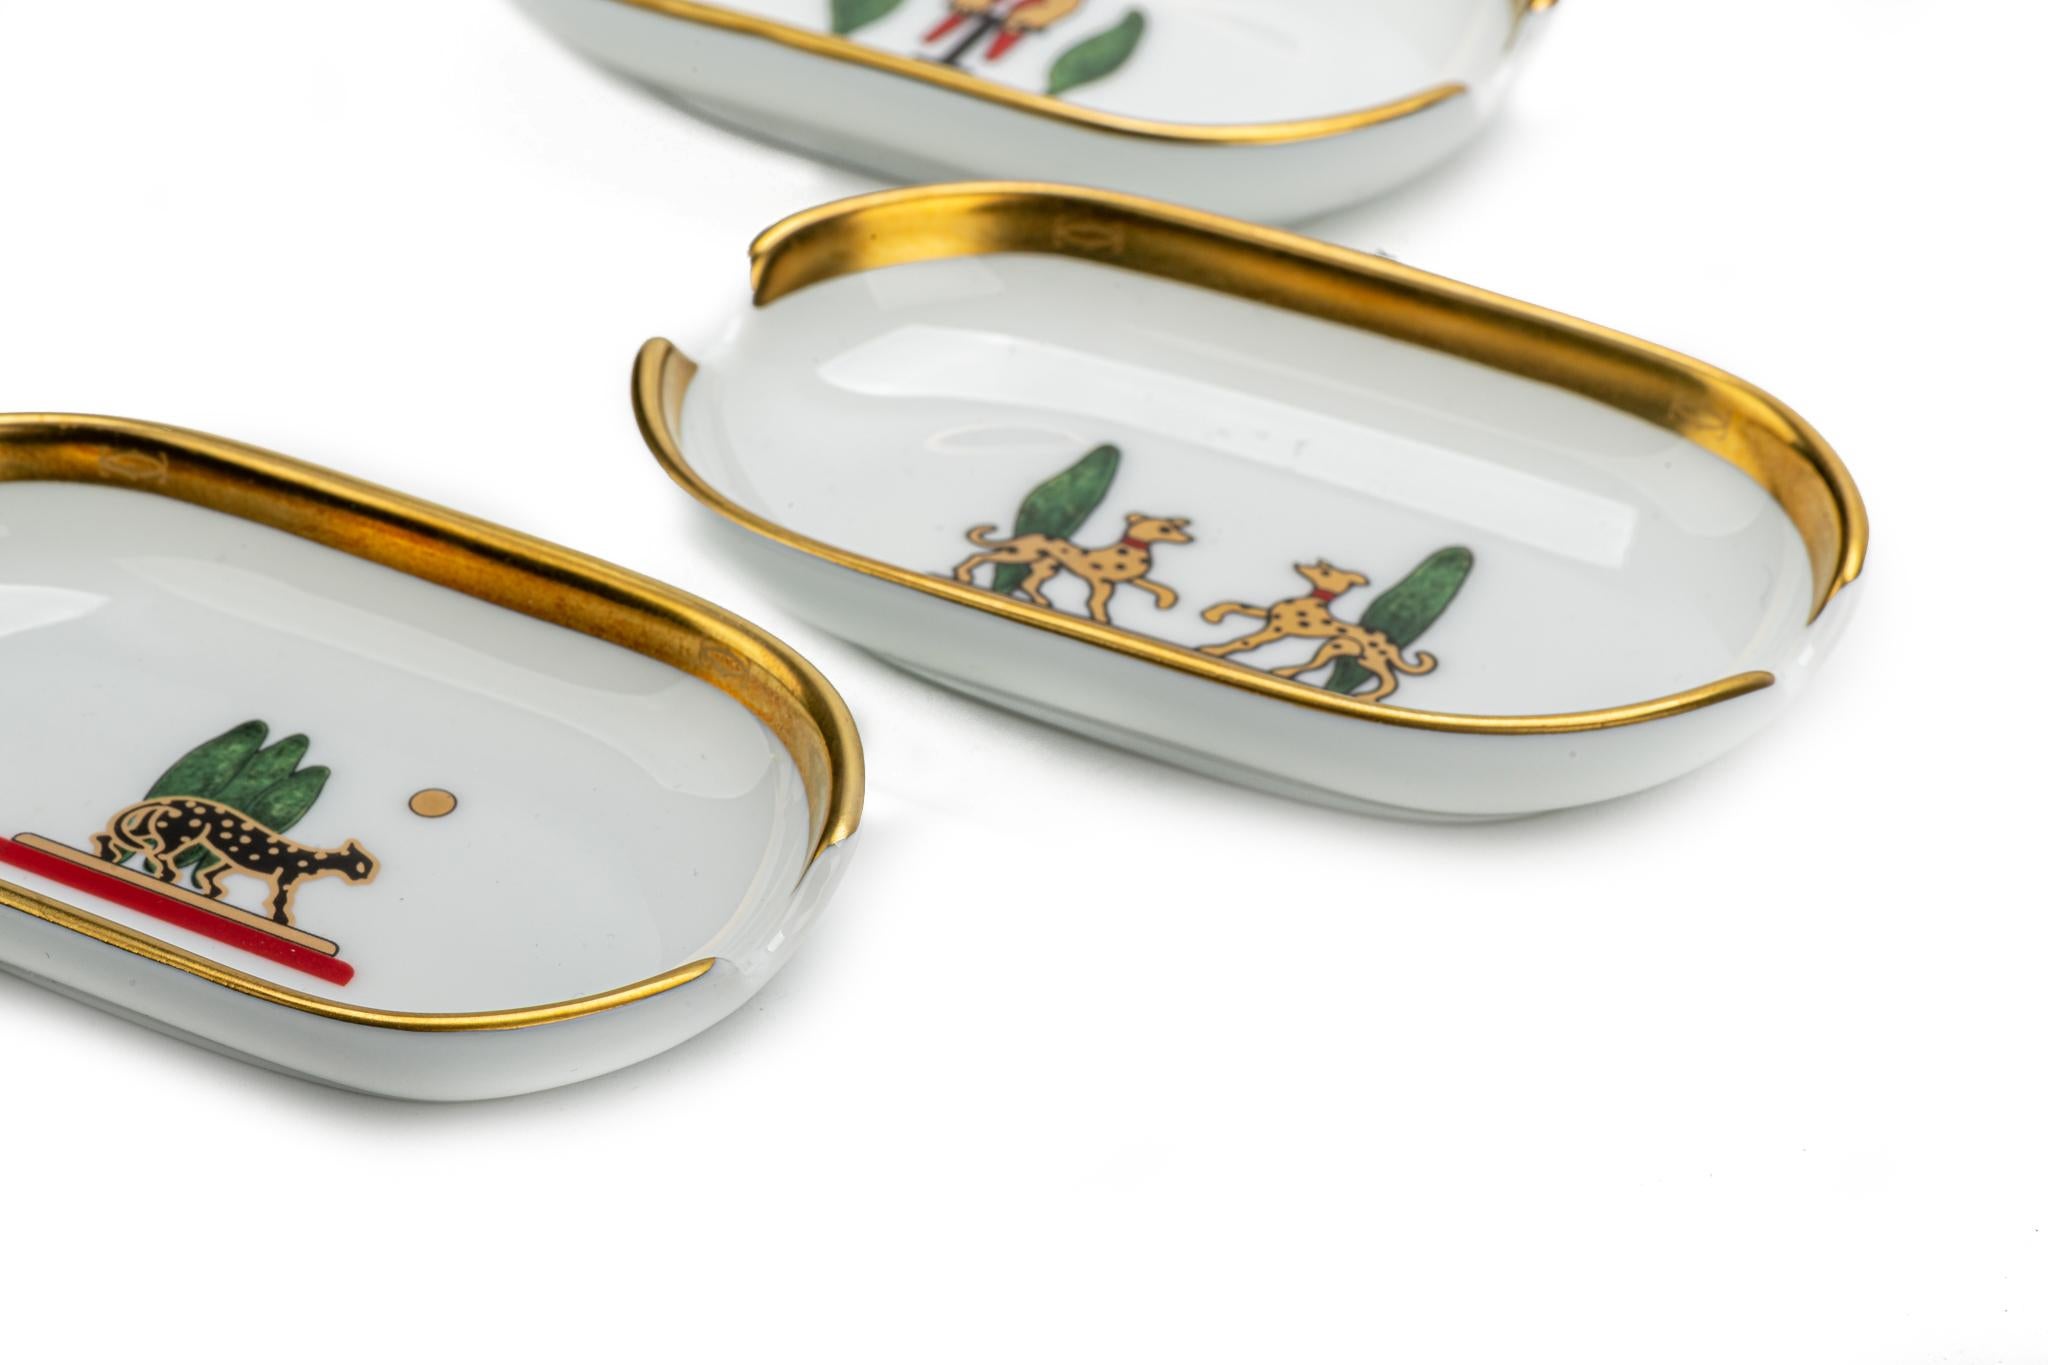 Cartier Set Of 3 Small Dishes In Box 3